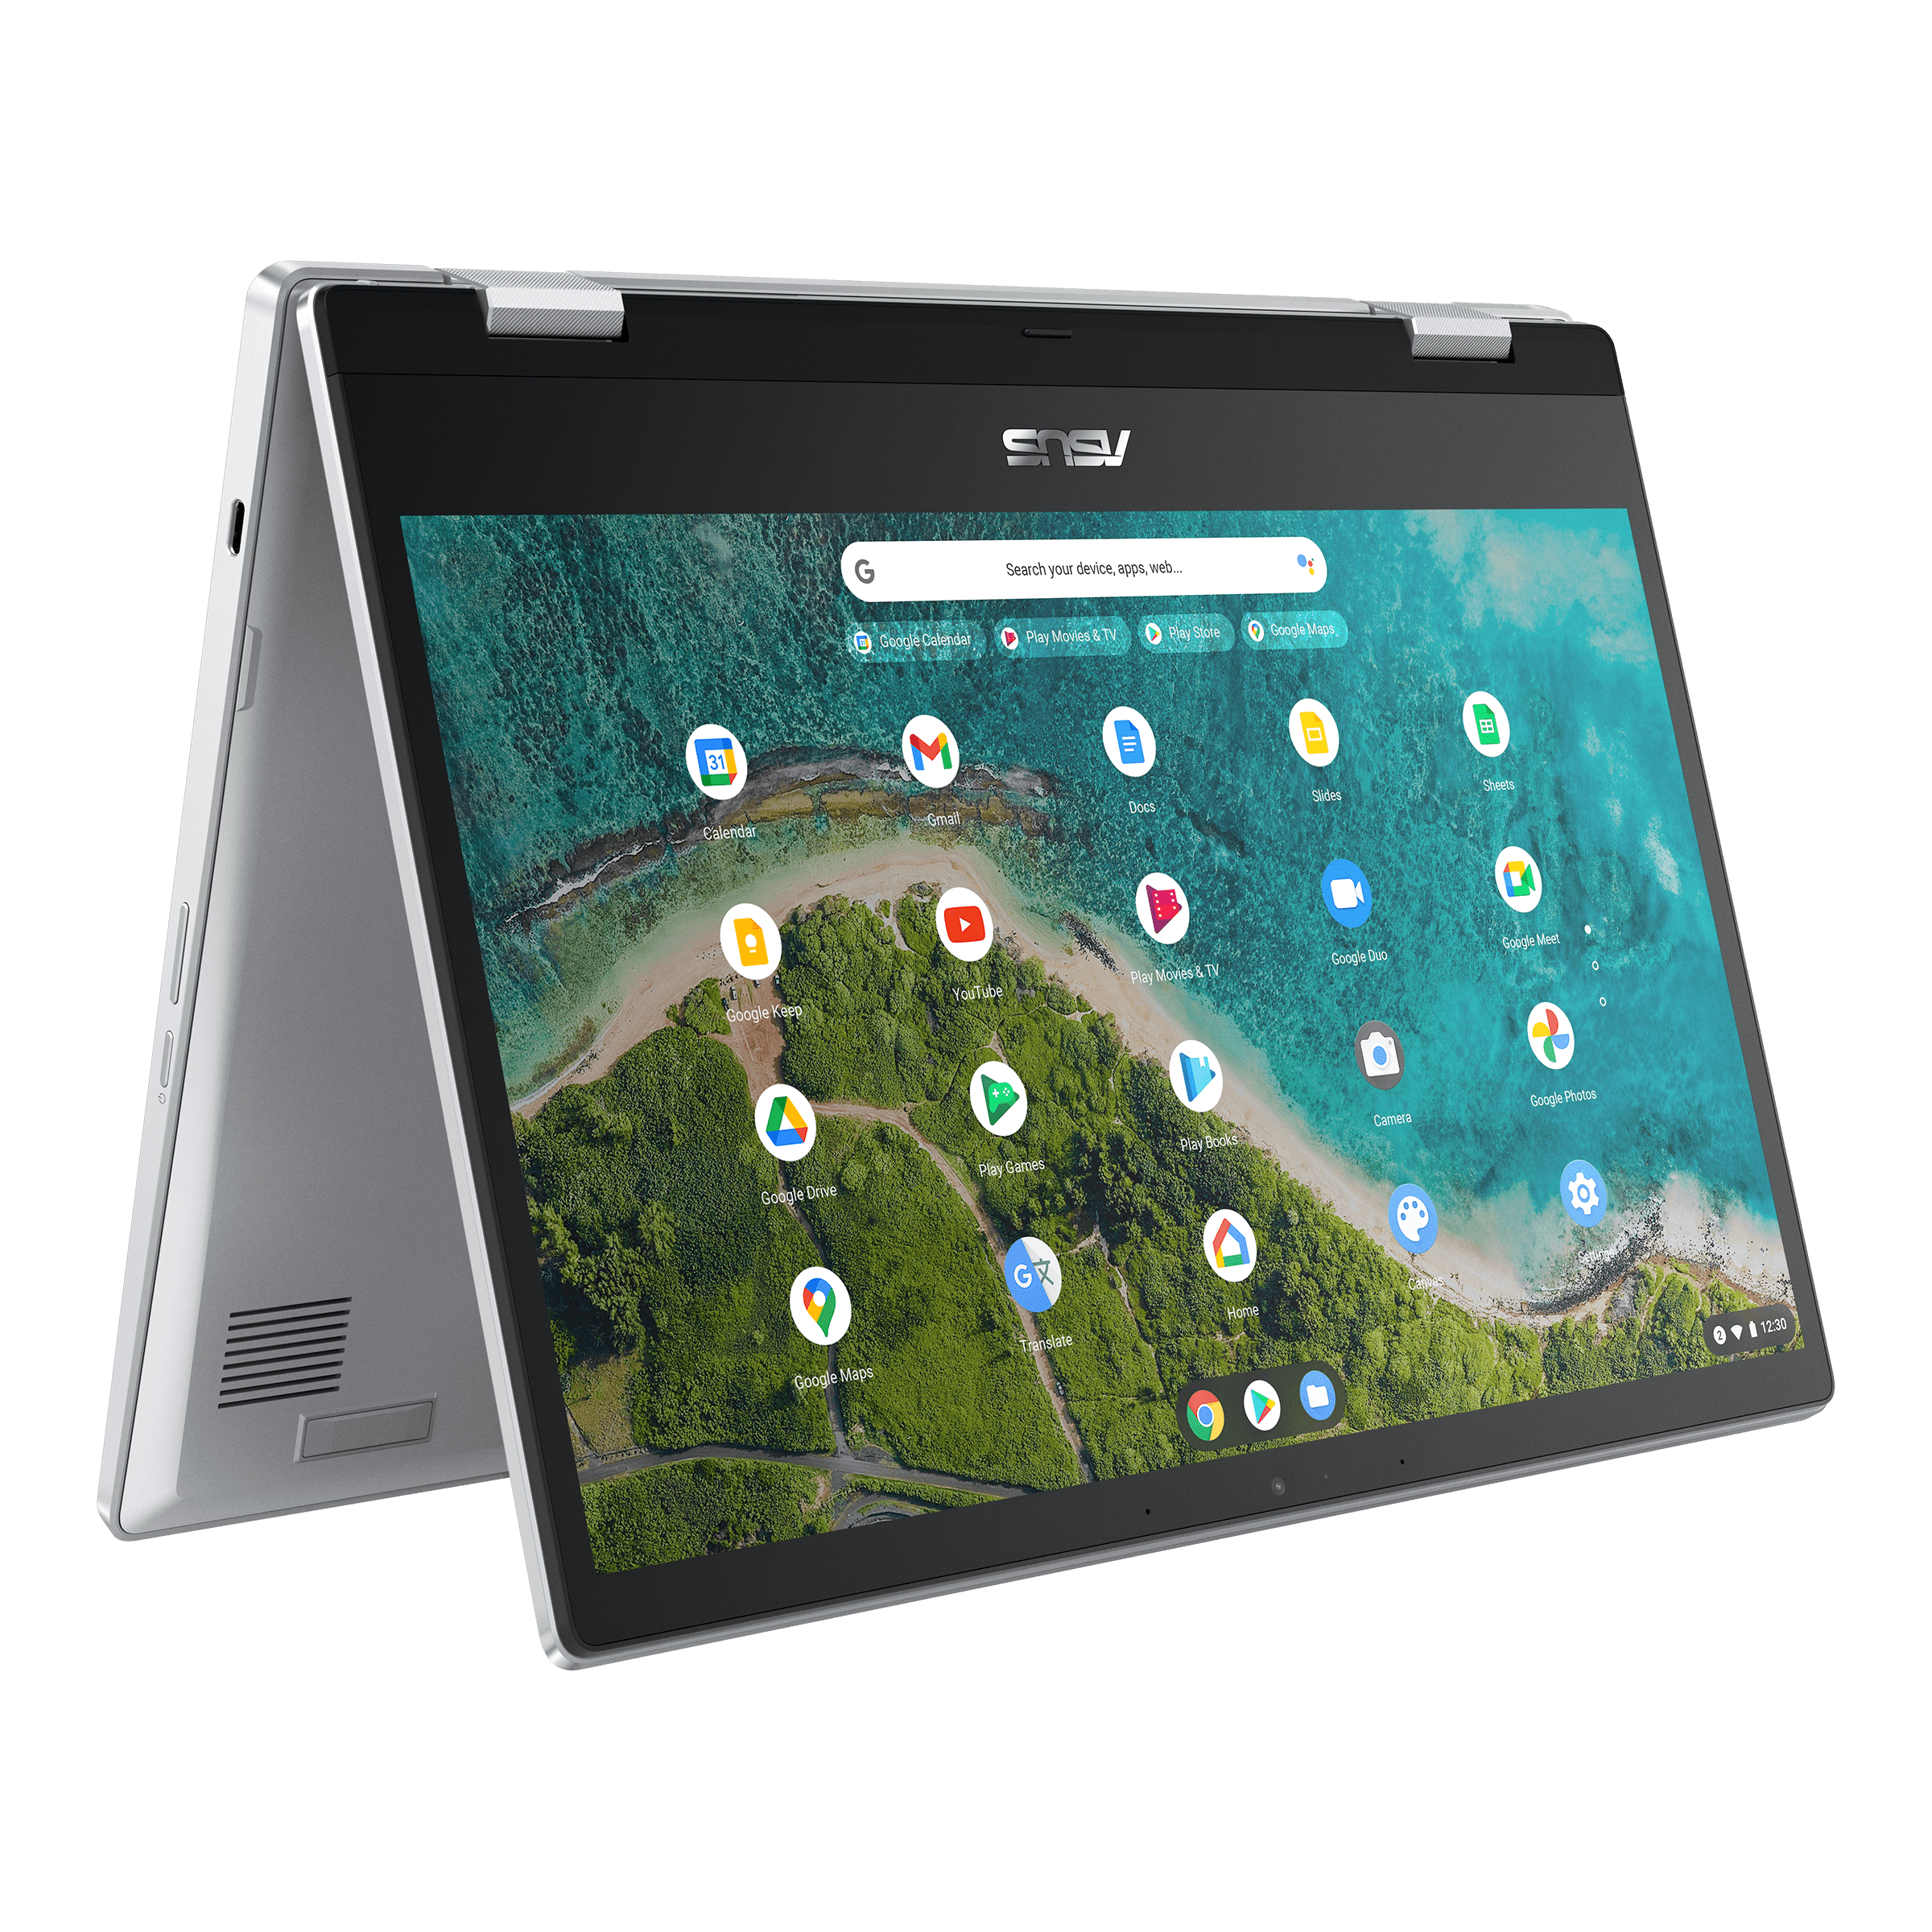 ASUS Chromebook Flip CX1 (CX1400)｜Laptops For Home｜ASUS Global